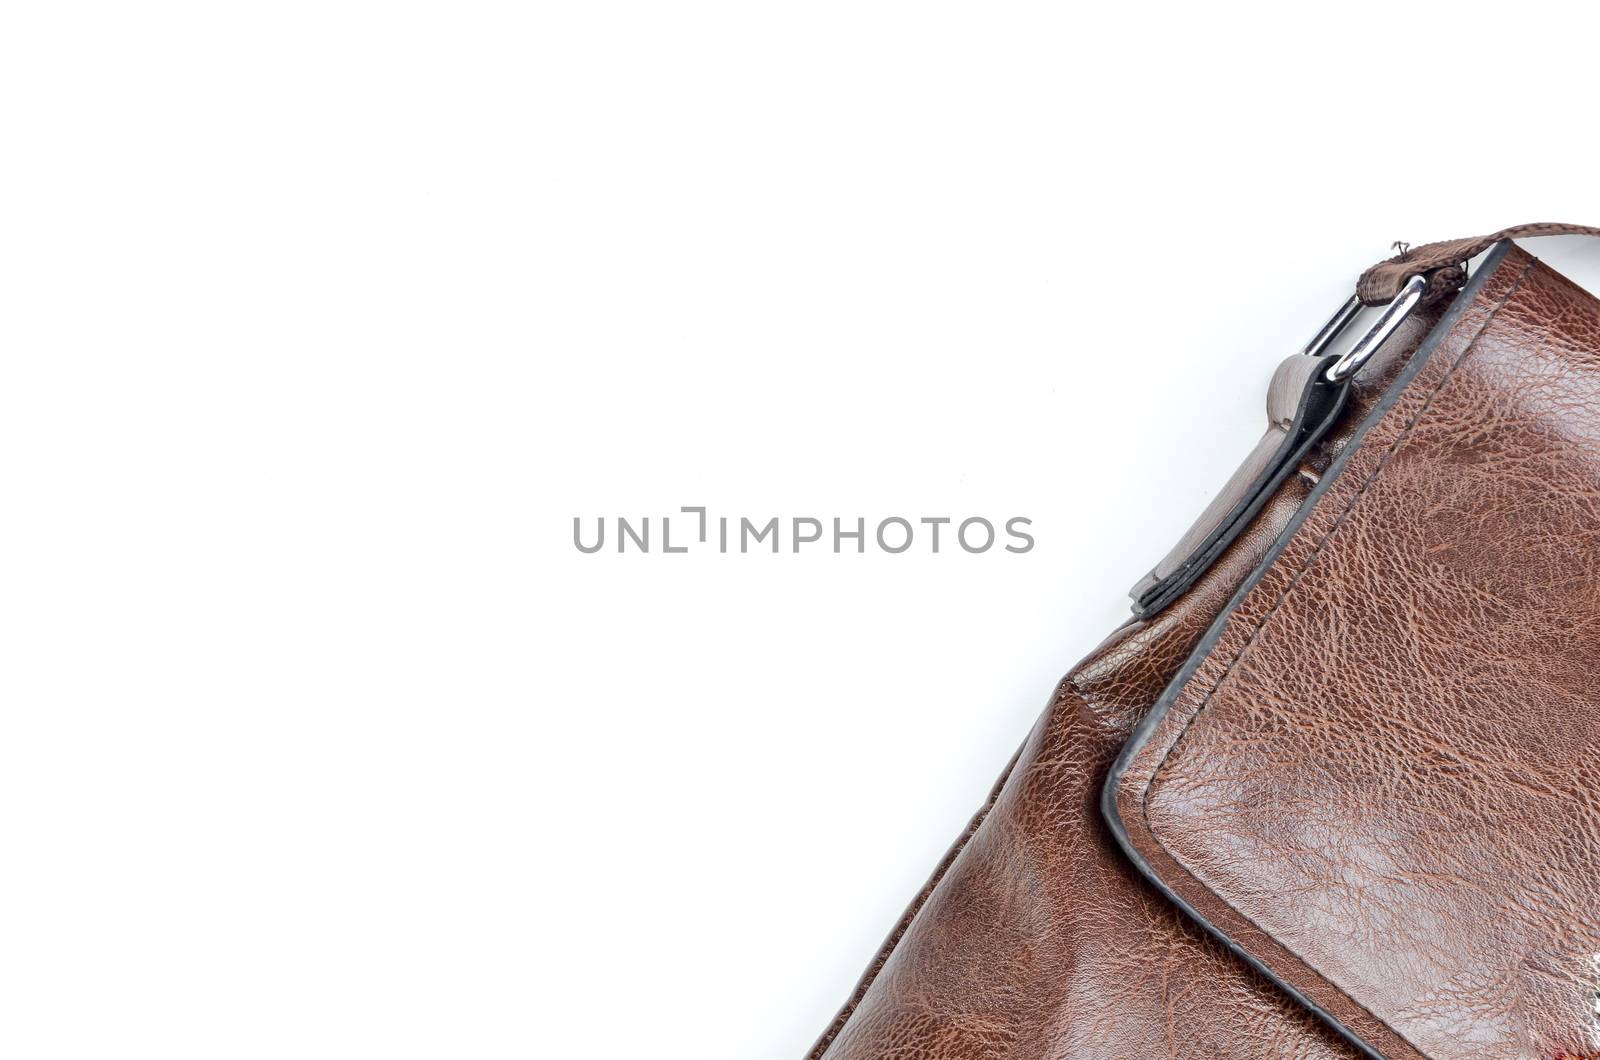 Brown sling bag on white background. Selective focus.